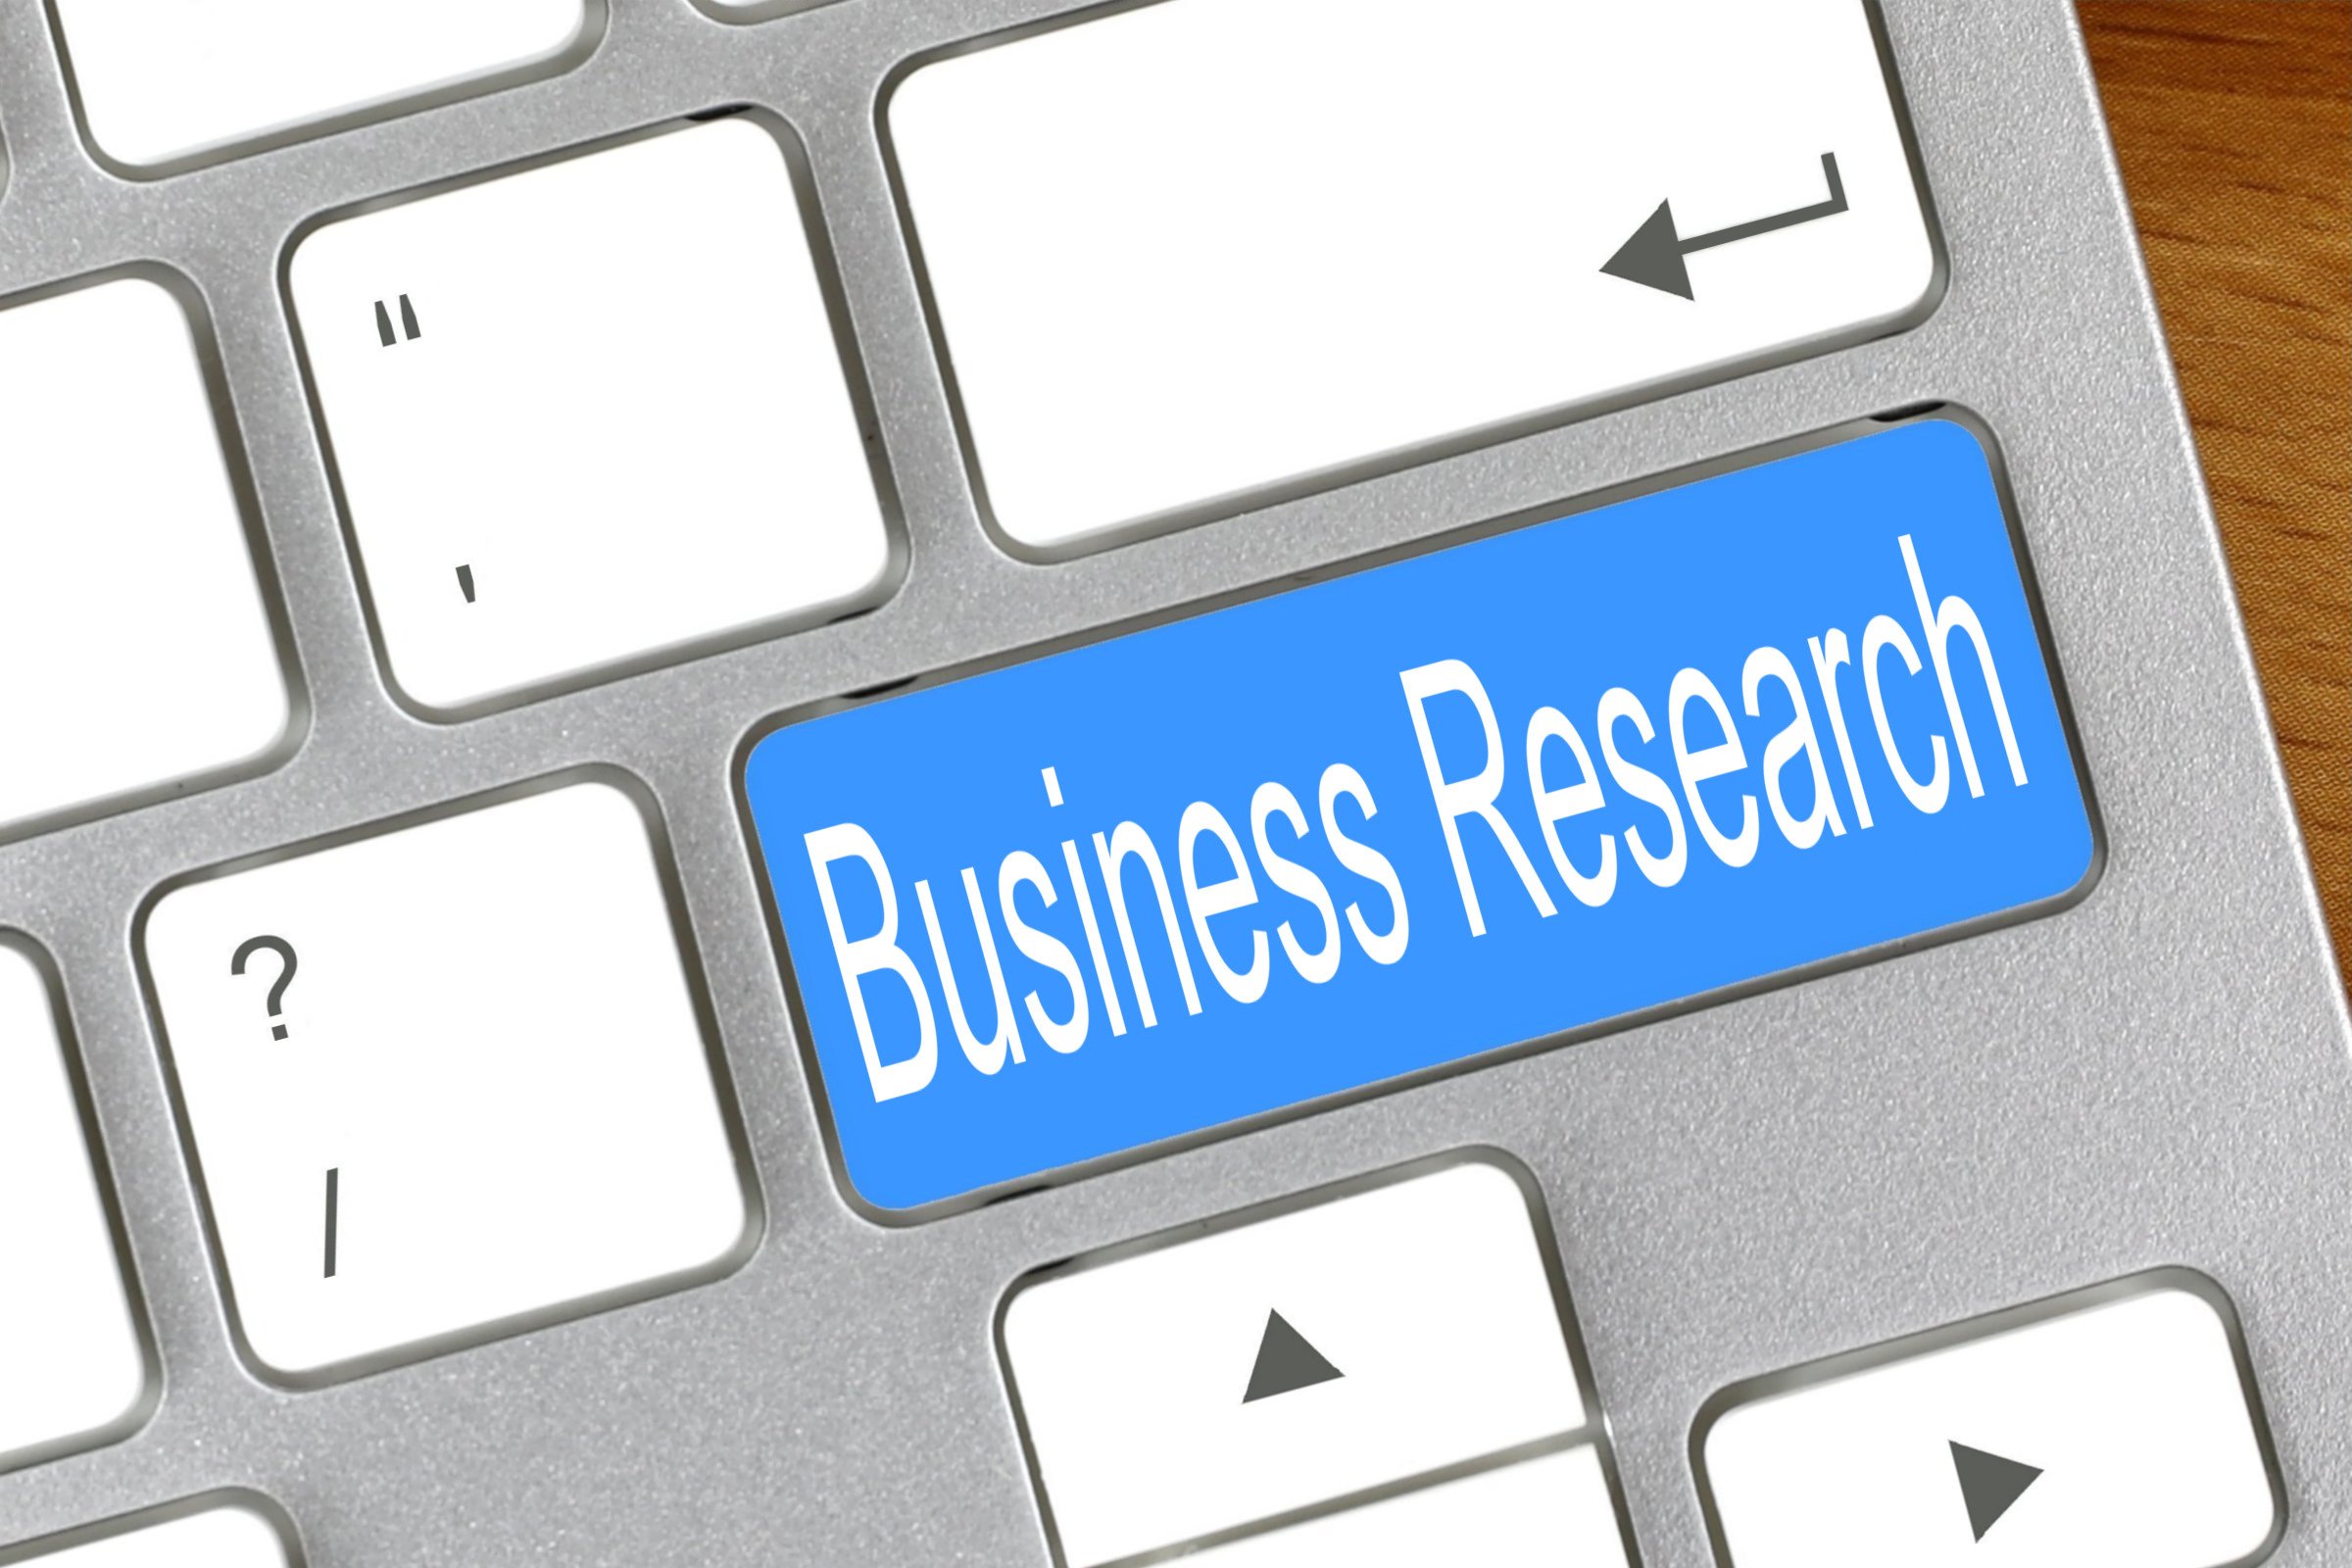 business research